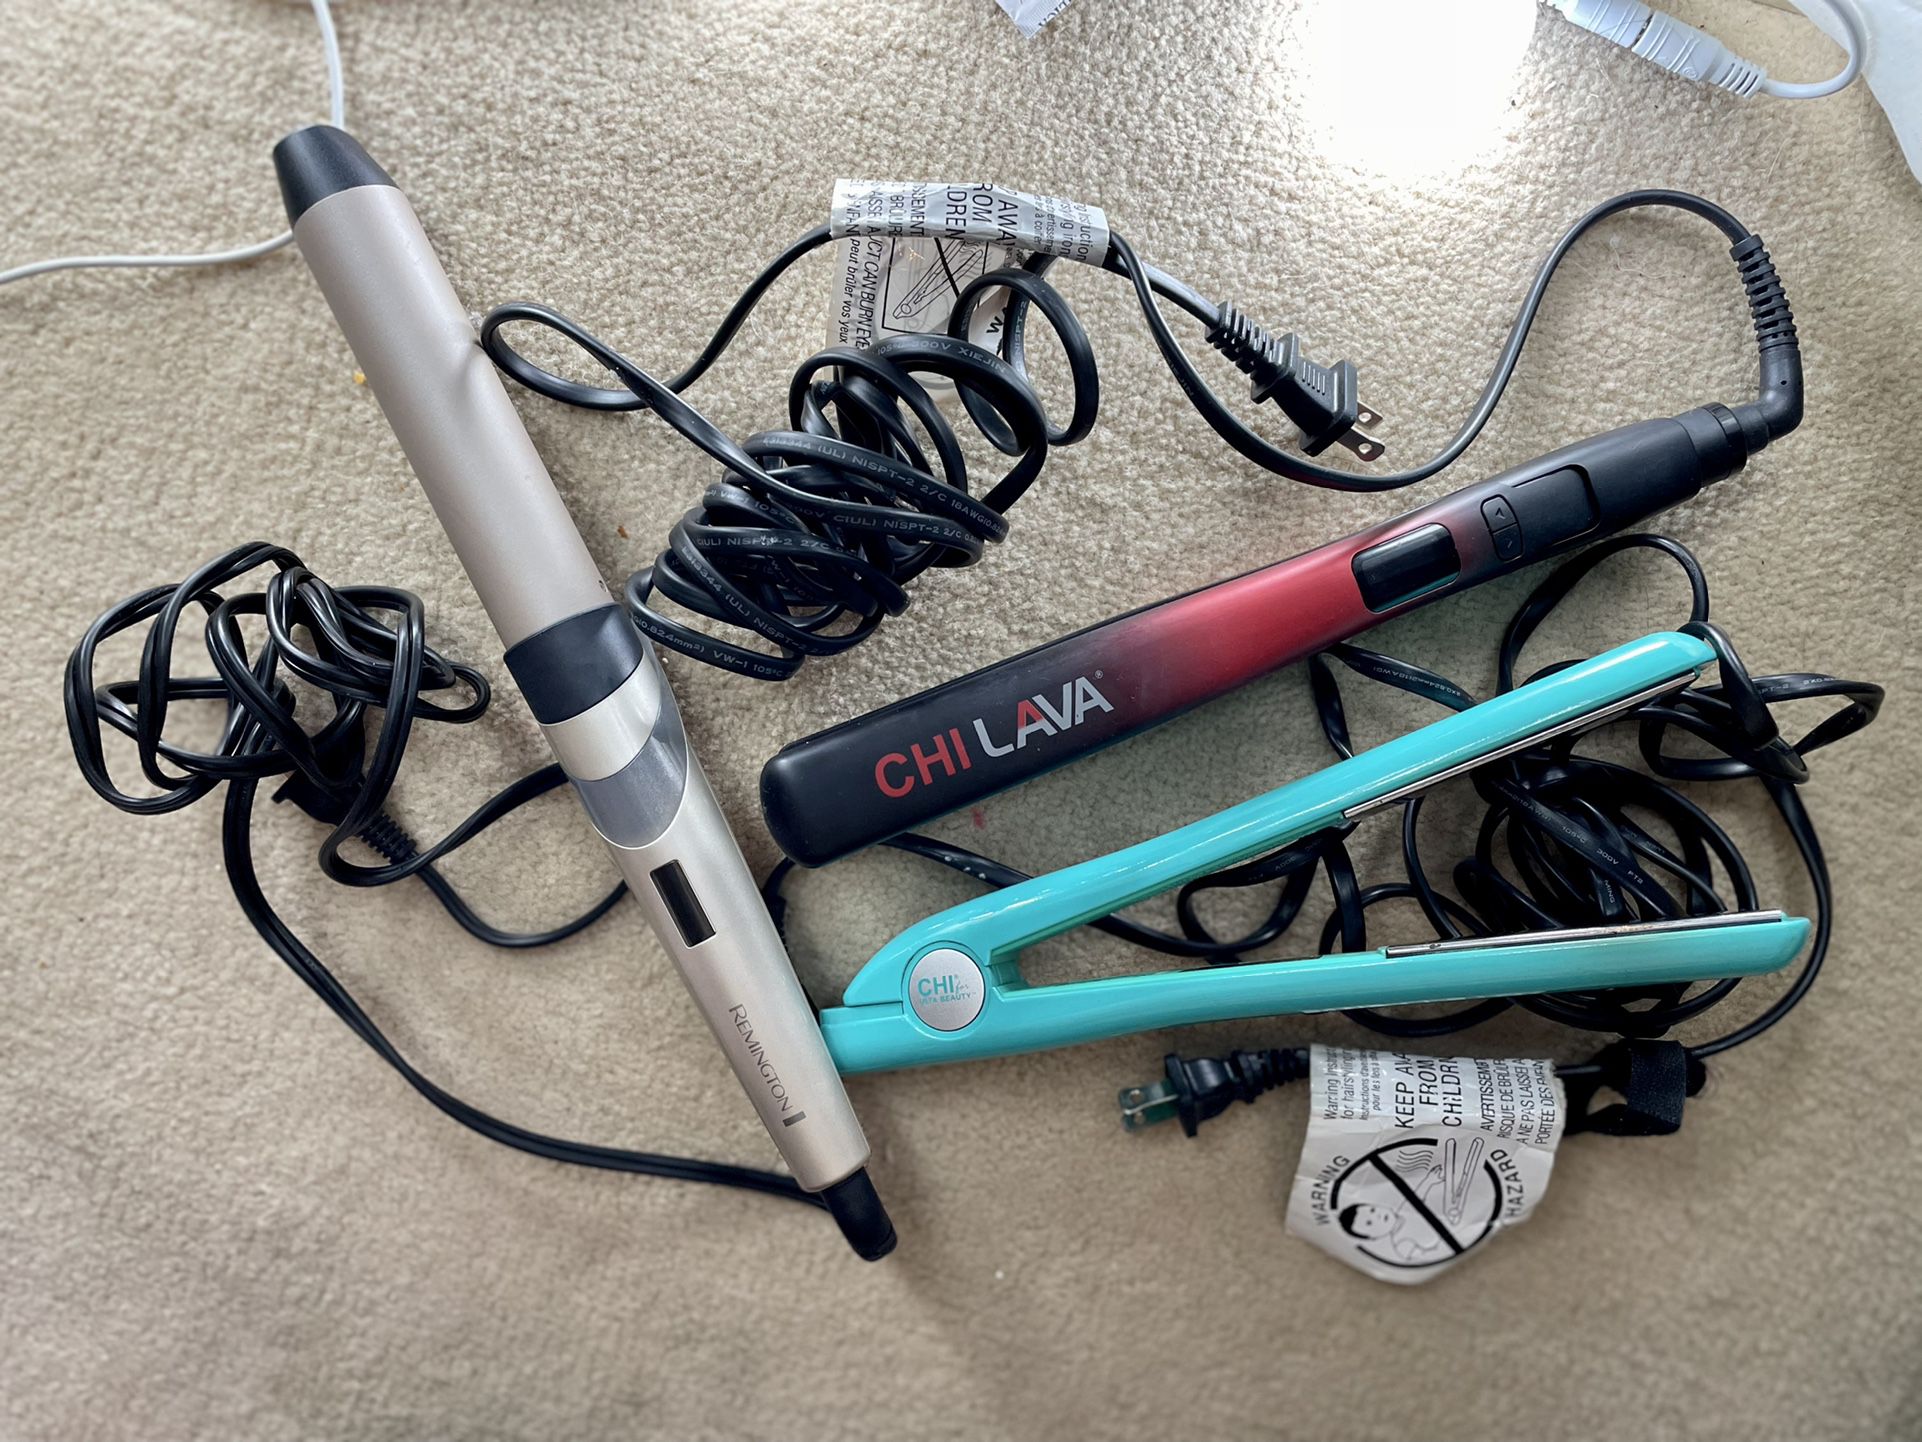 Two Chi Hair Straighteners And One Remington Hair Curler